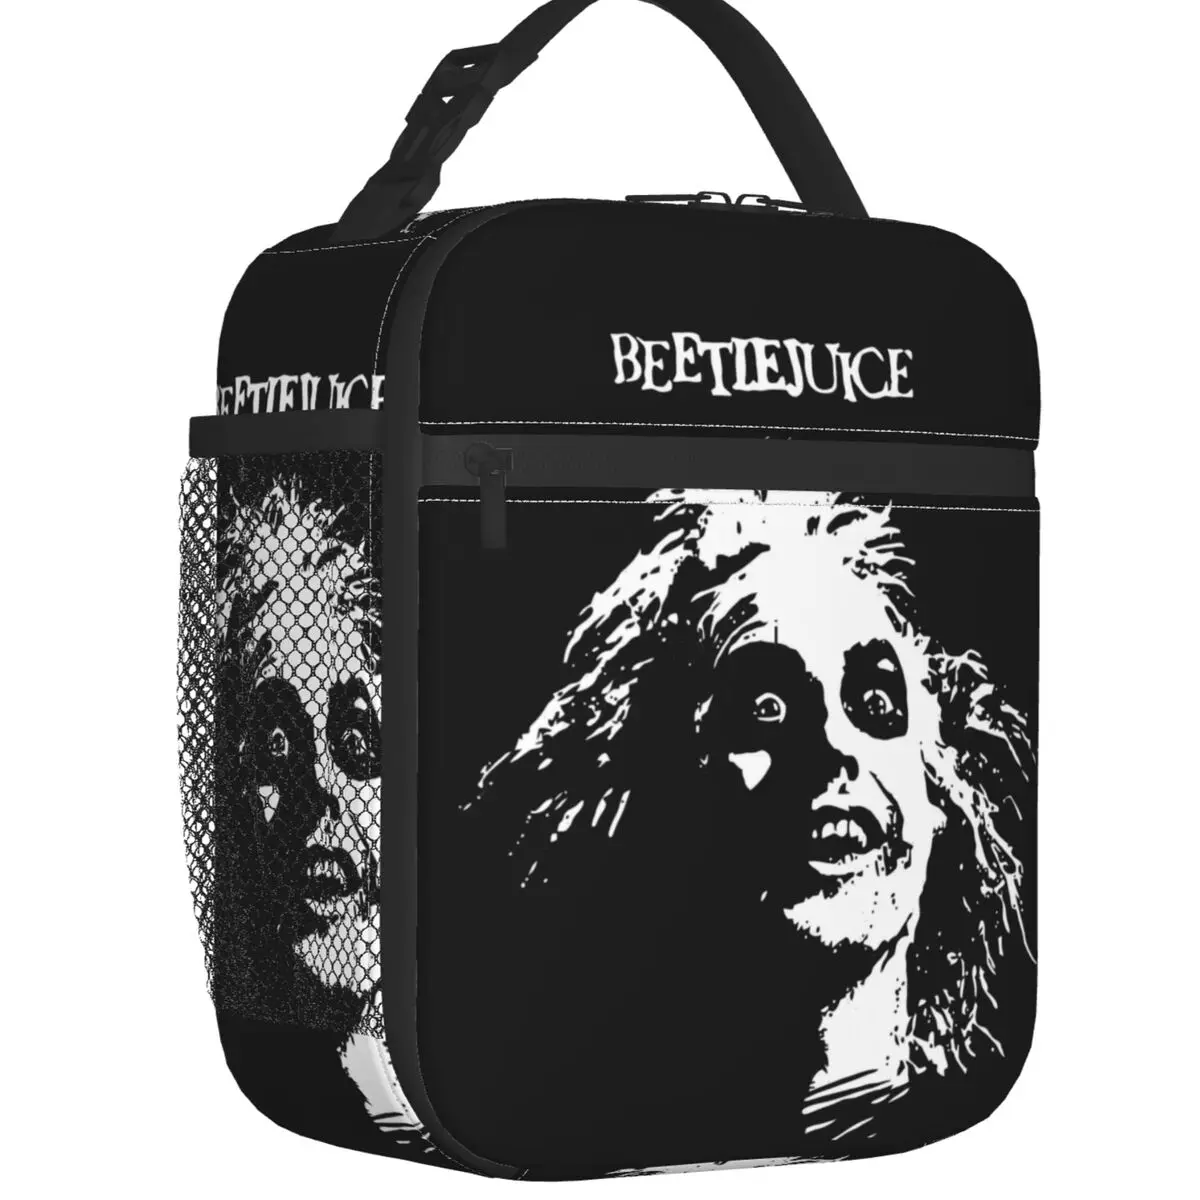 

Beetlejuice Horror Ghost Insulated Lunch Bag for Women Waterproof Tim Burton Movie Thermal Cooler Lunch Box Office Work School